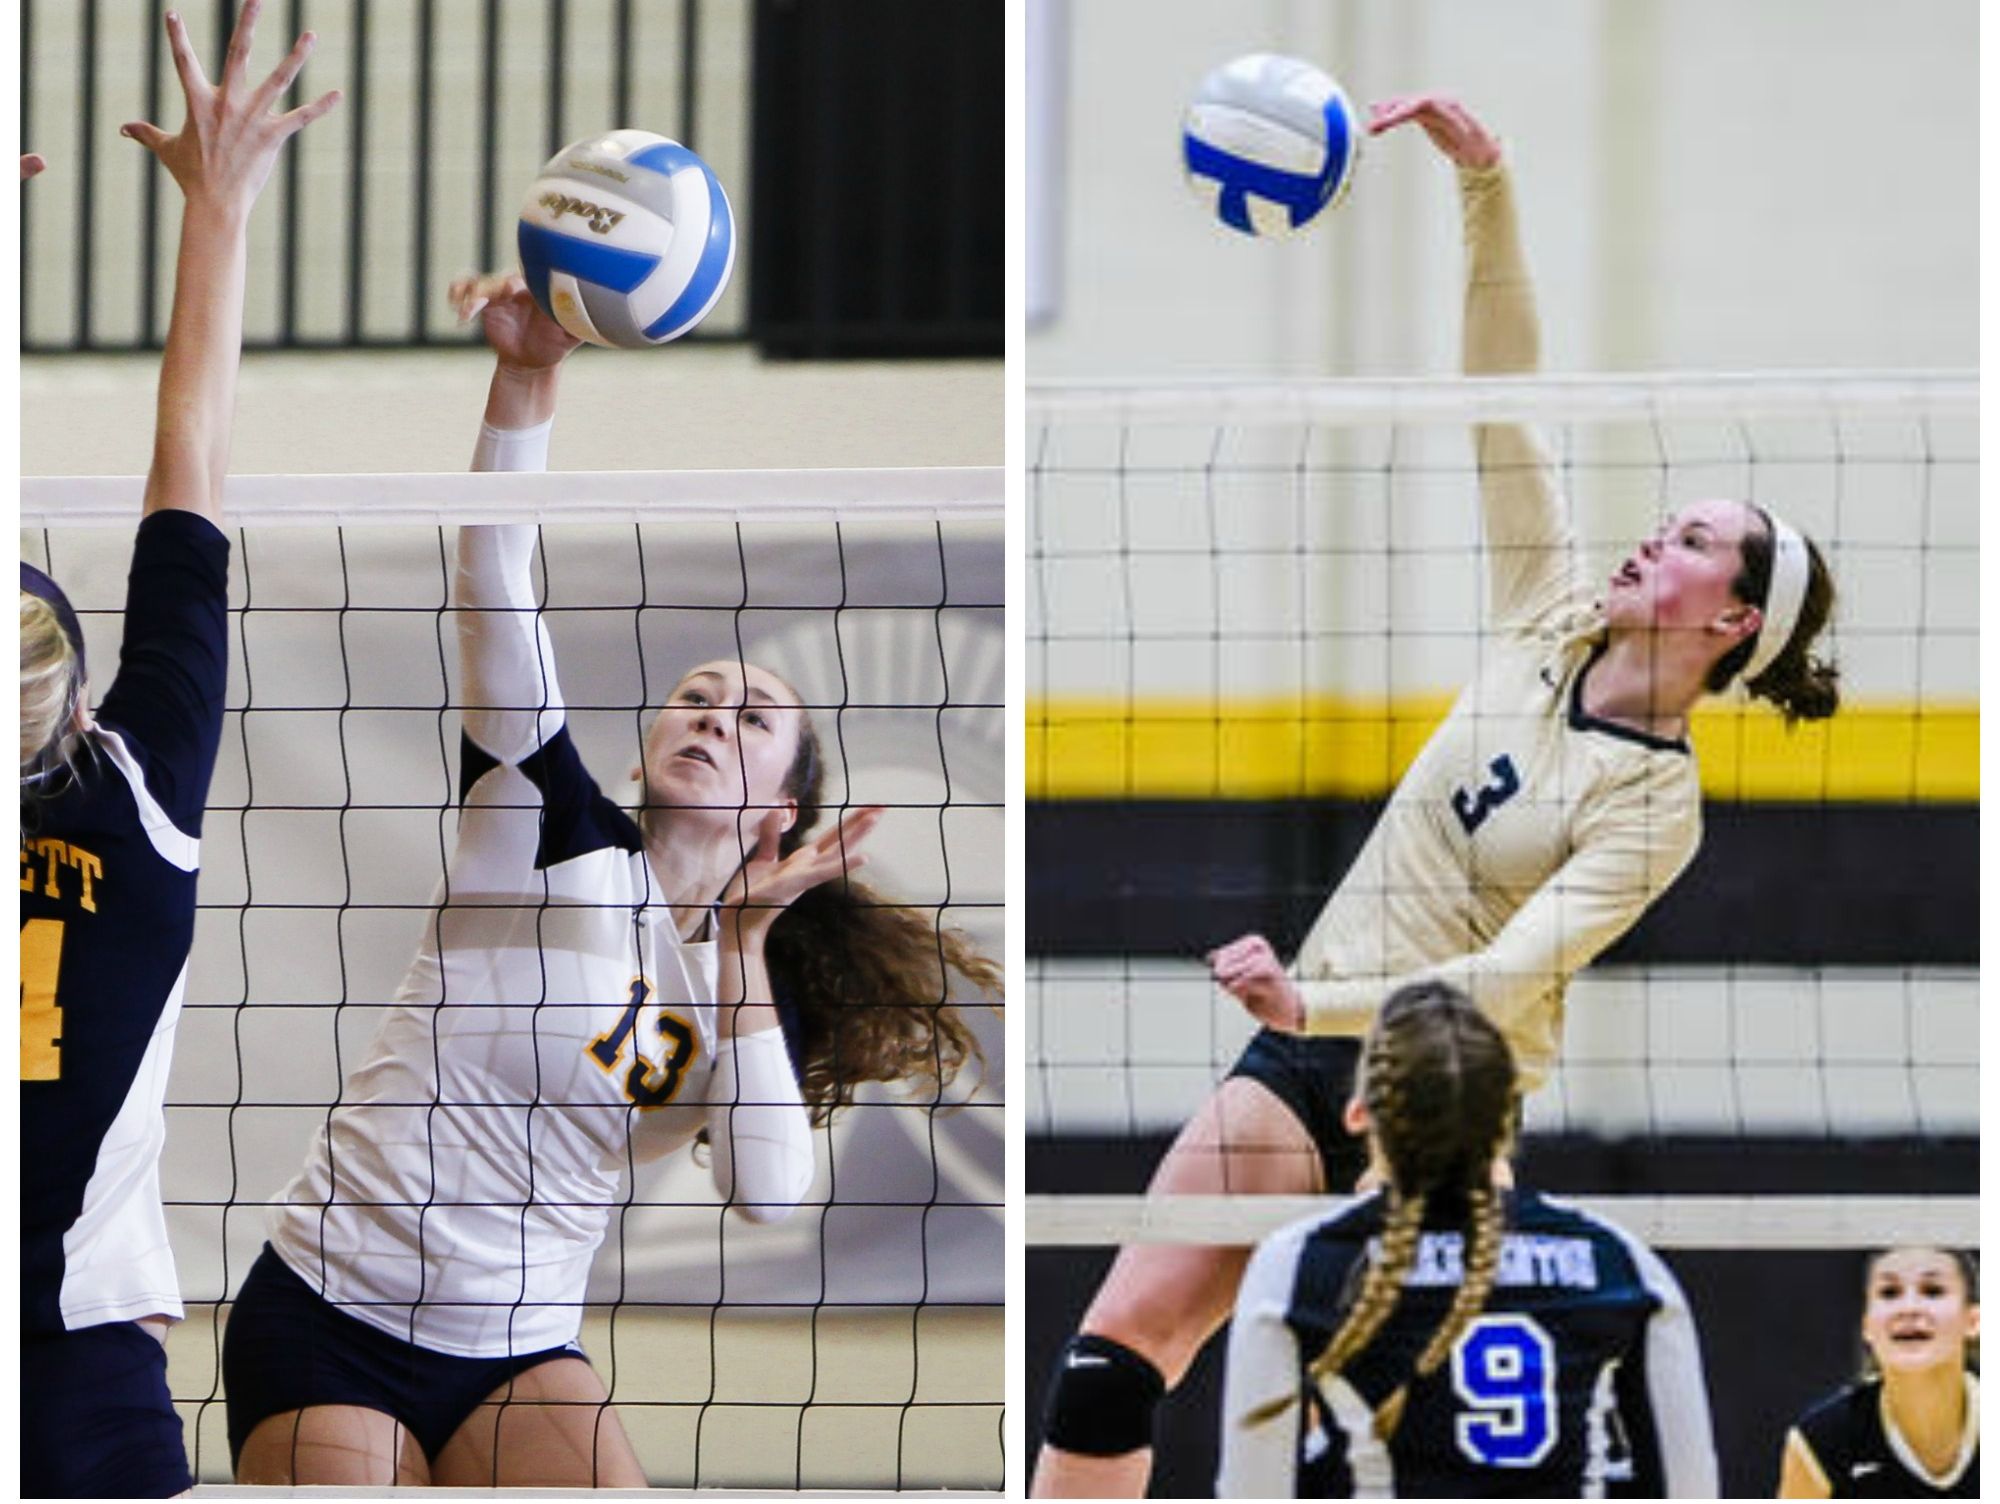 DeWitt's Lexi Nordmann (left) and Corunna's Meredith Norris (right) were both selected to the Under Armour All-America Teams Wednesday. Both Lansing-area players are finalists for Miss Michigan Volleyball.